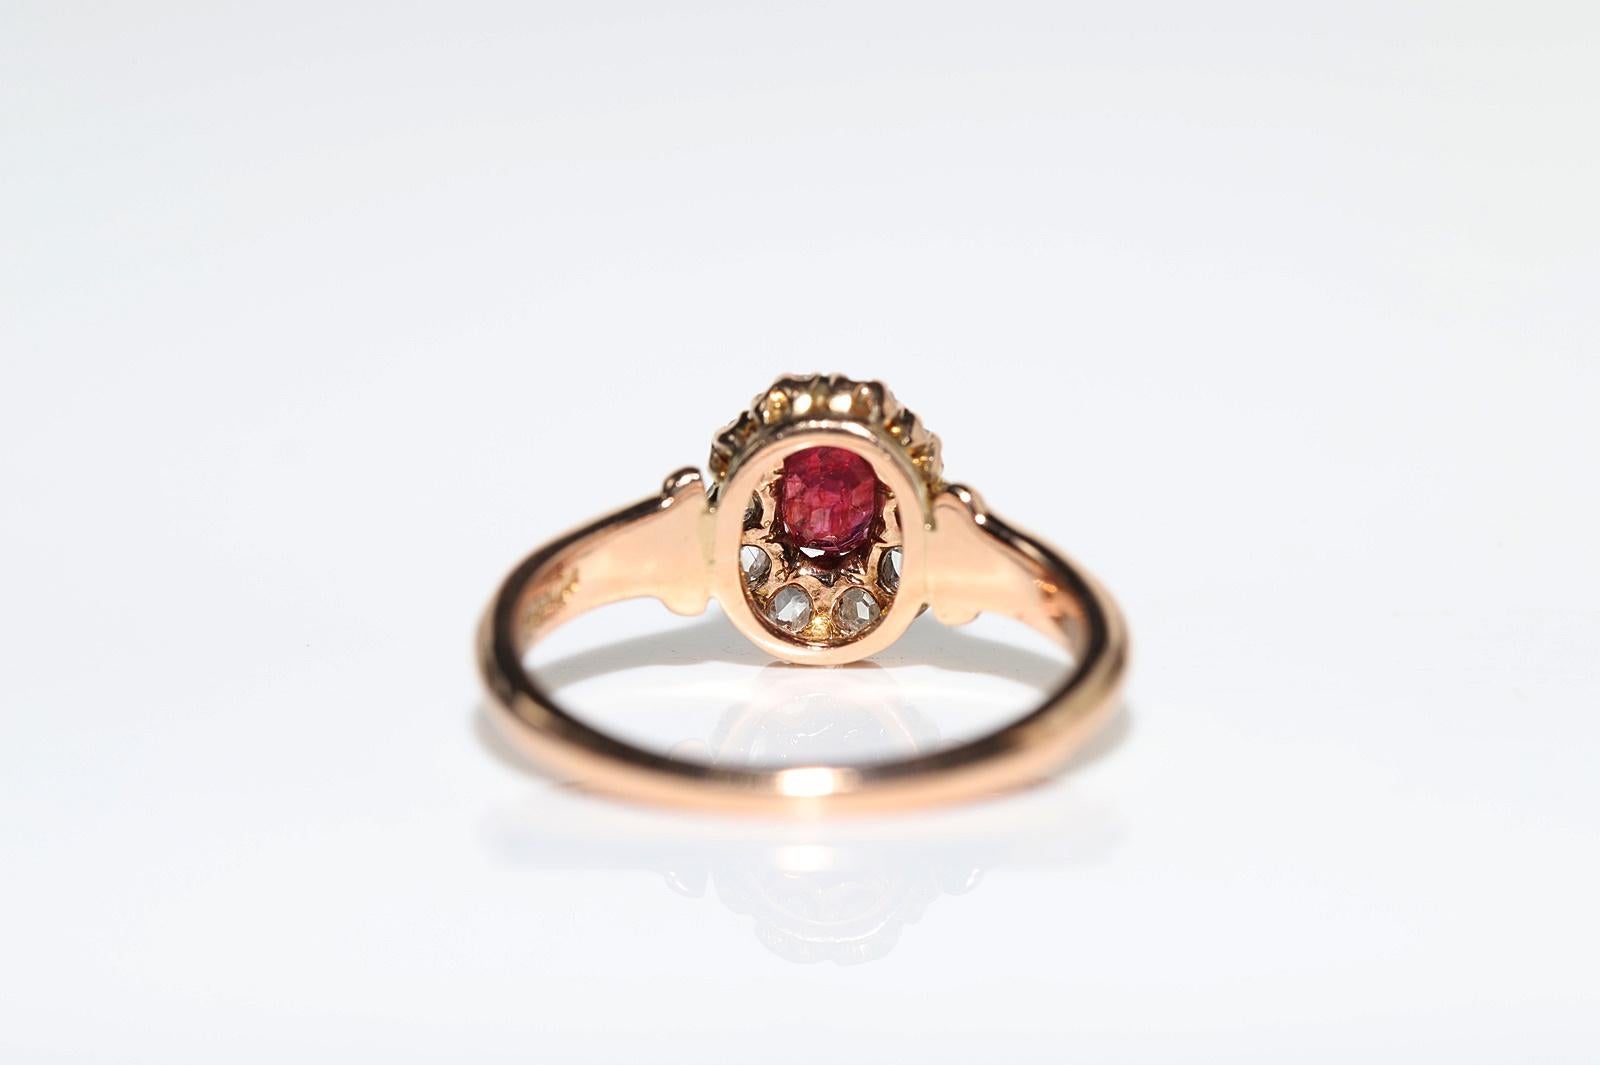 Antique Circa 1900s 14k Gold Natural Rose Cut Diamond And Ruby Decorated Ring For Sale 2